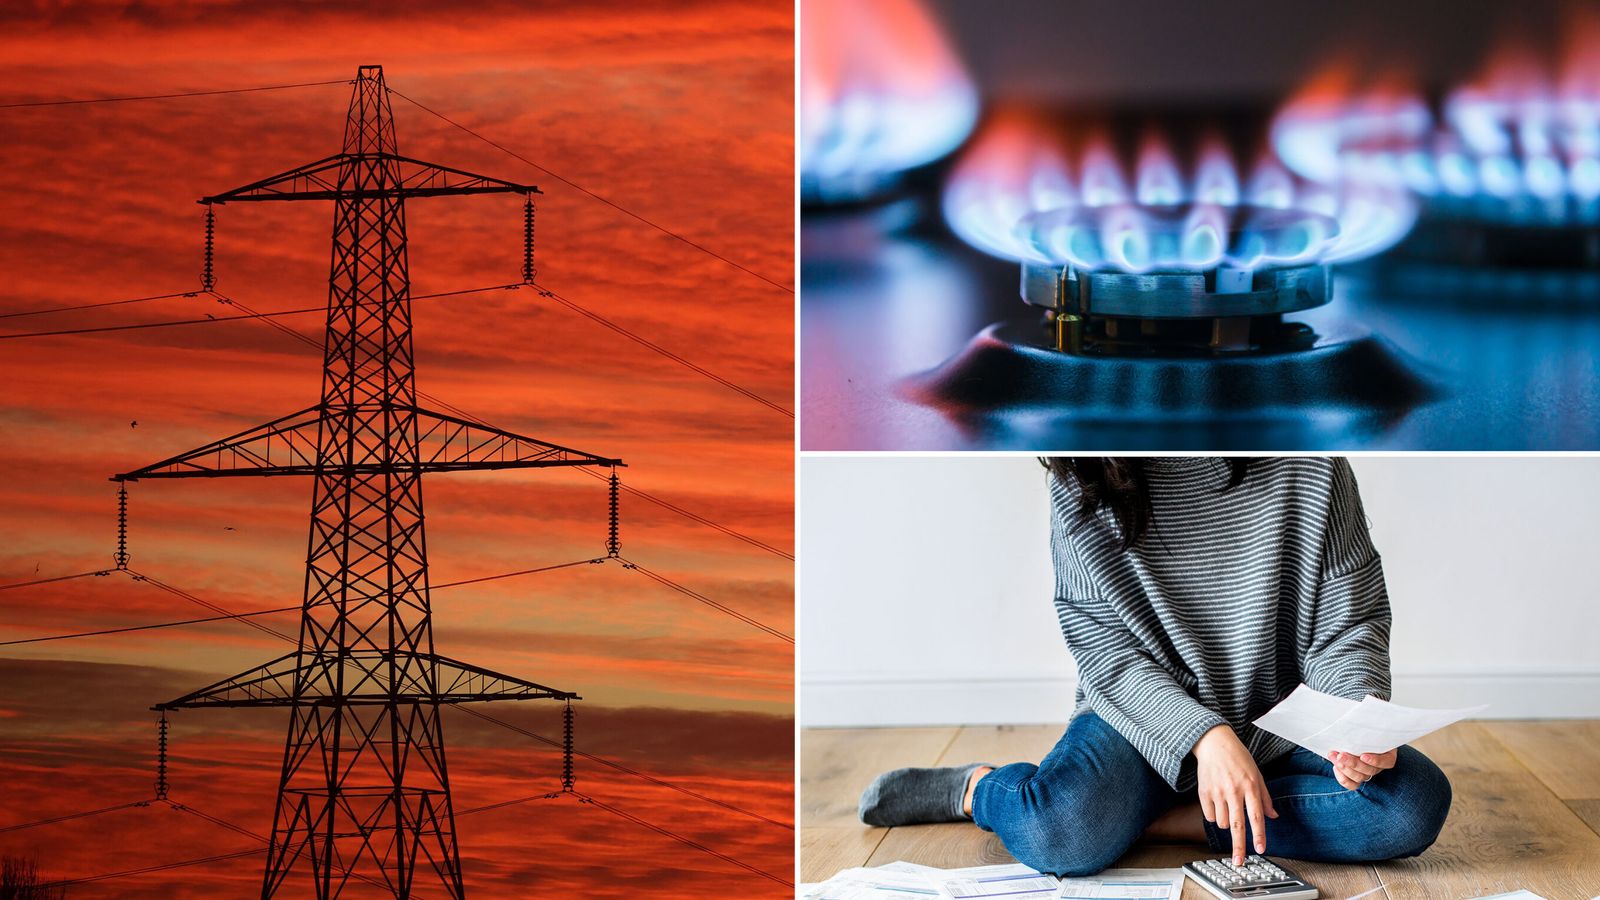 Minister issues fraud warning as government energy support package comes into effect